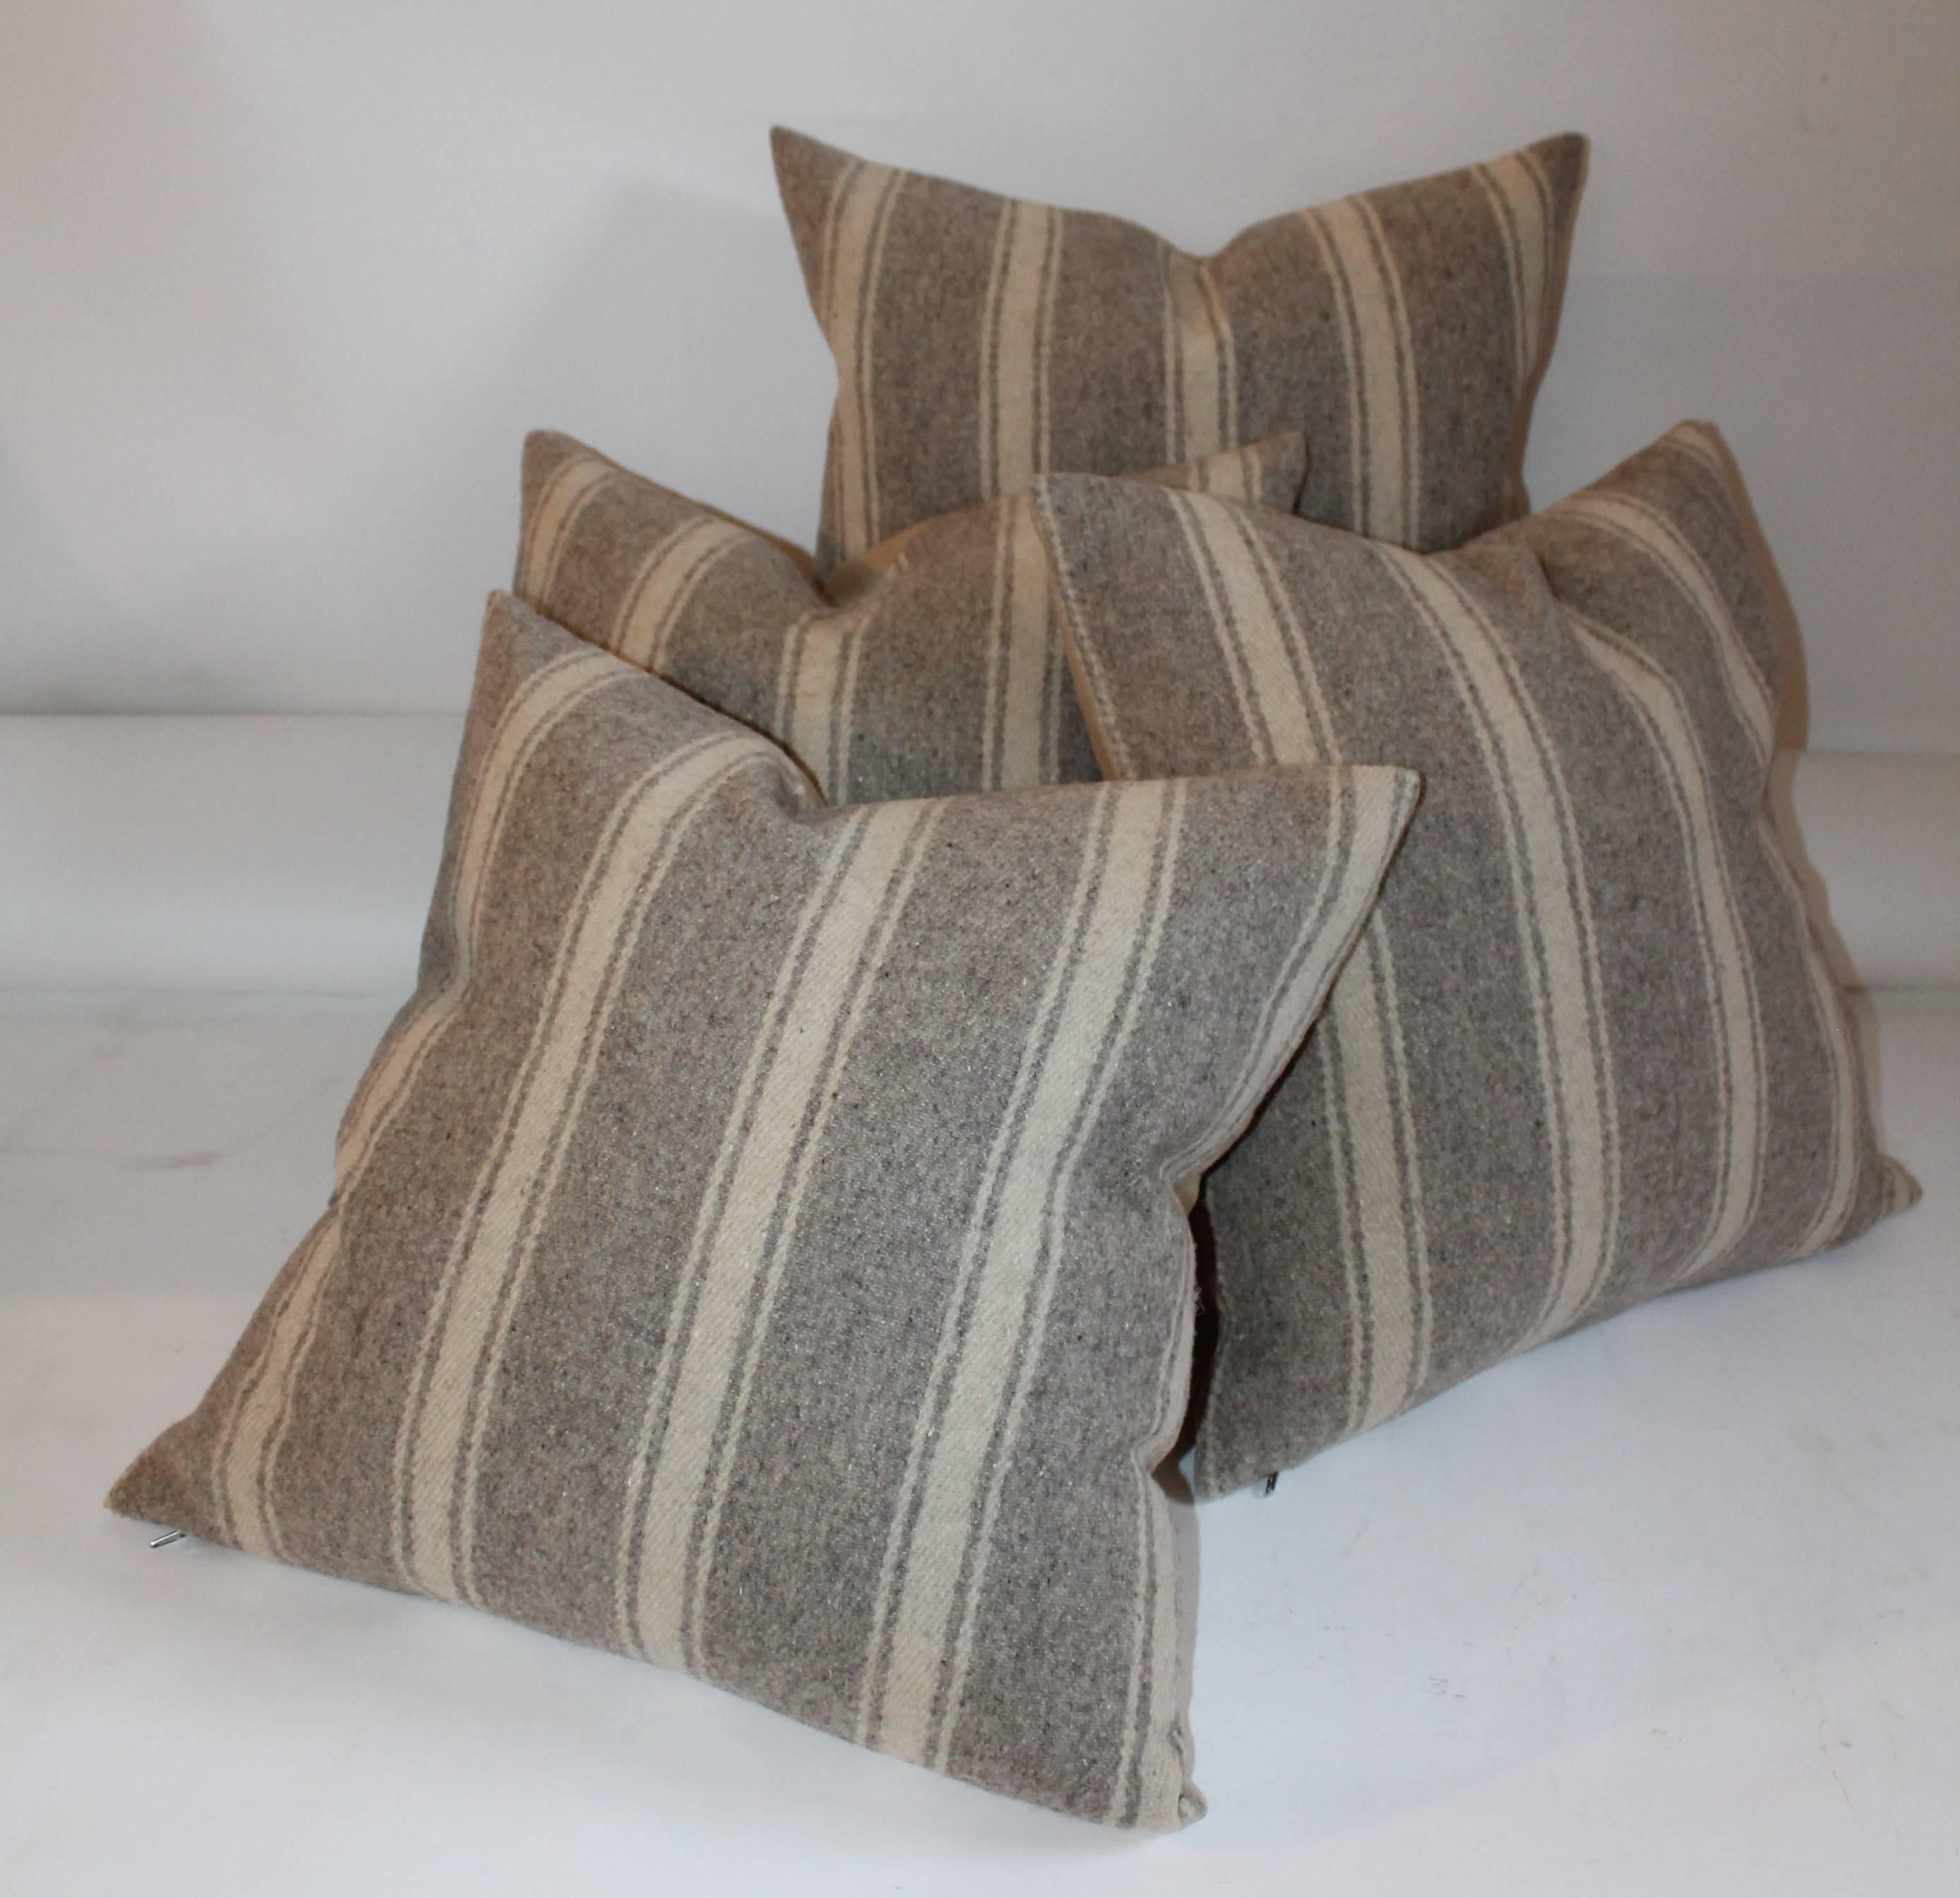 These handwoven striped saddle blanket weaving pillows are in fine condition. They have a soft cotton linen backing. Sold as a group of four.